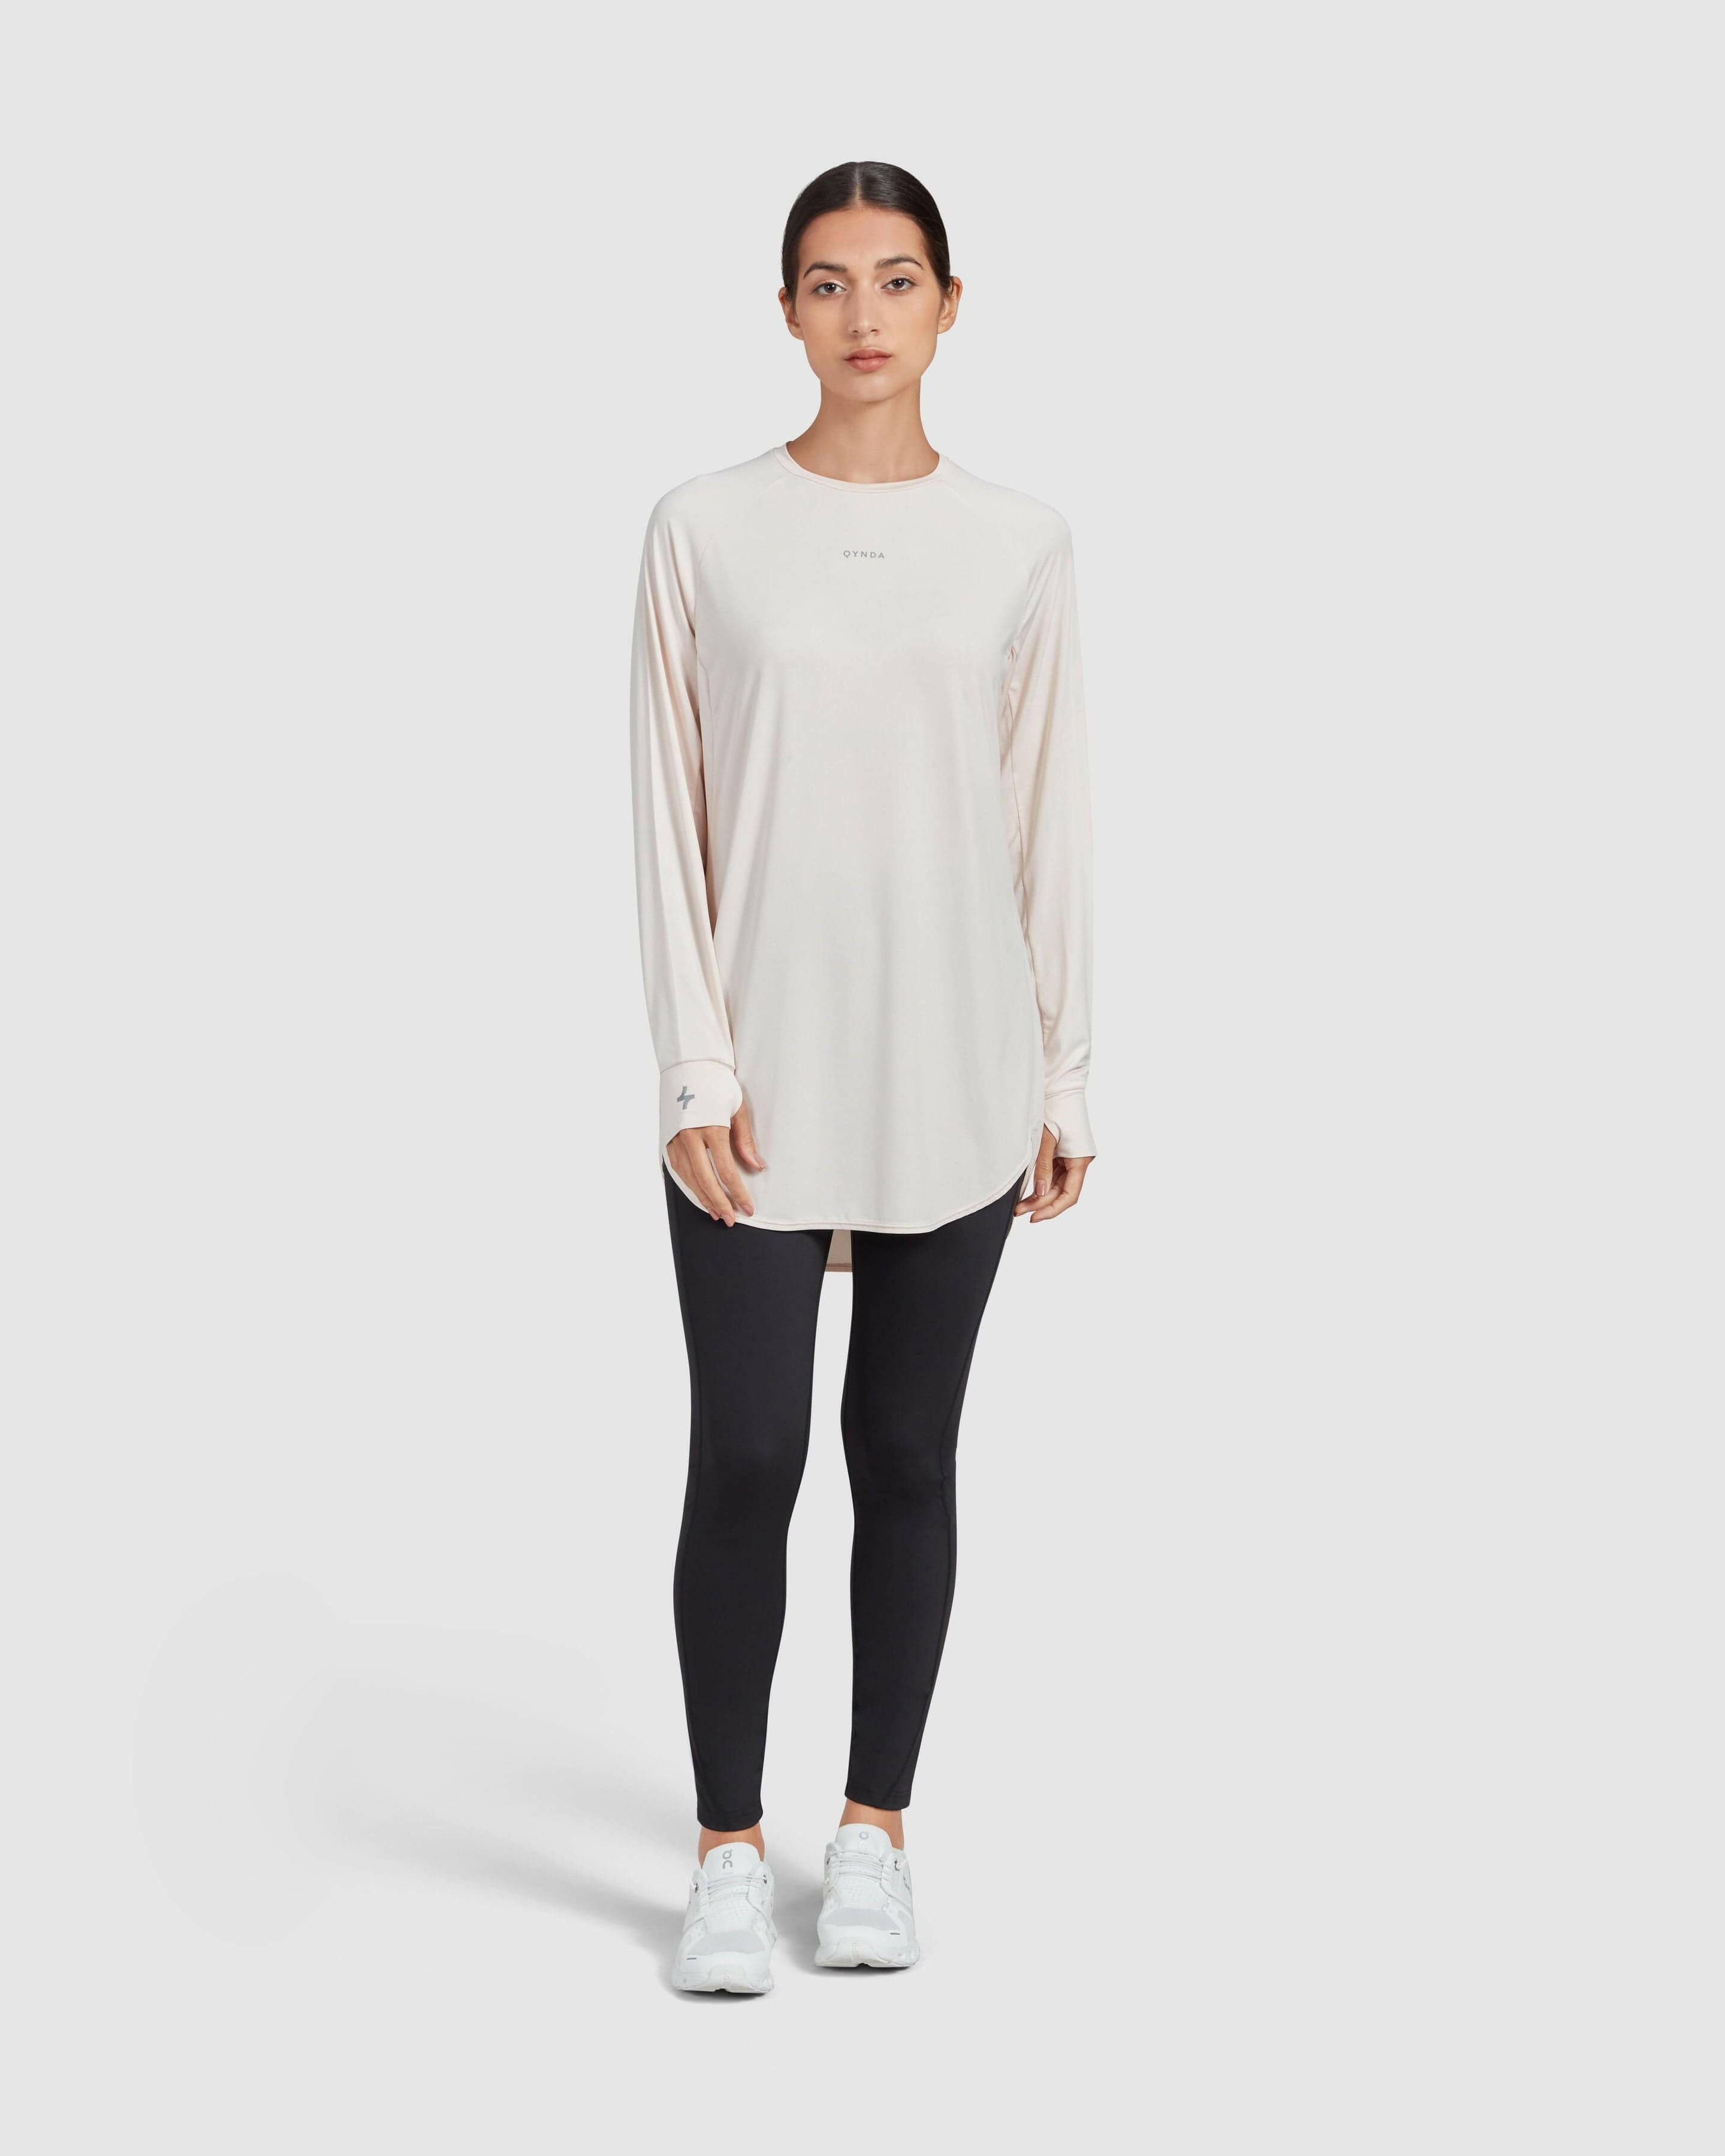 A model stands against a white background, dressed in a modest shell MOD LONG SLEEVE T-SHIRT and black leggings